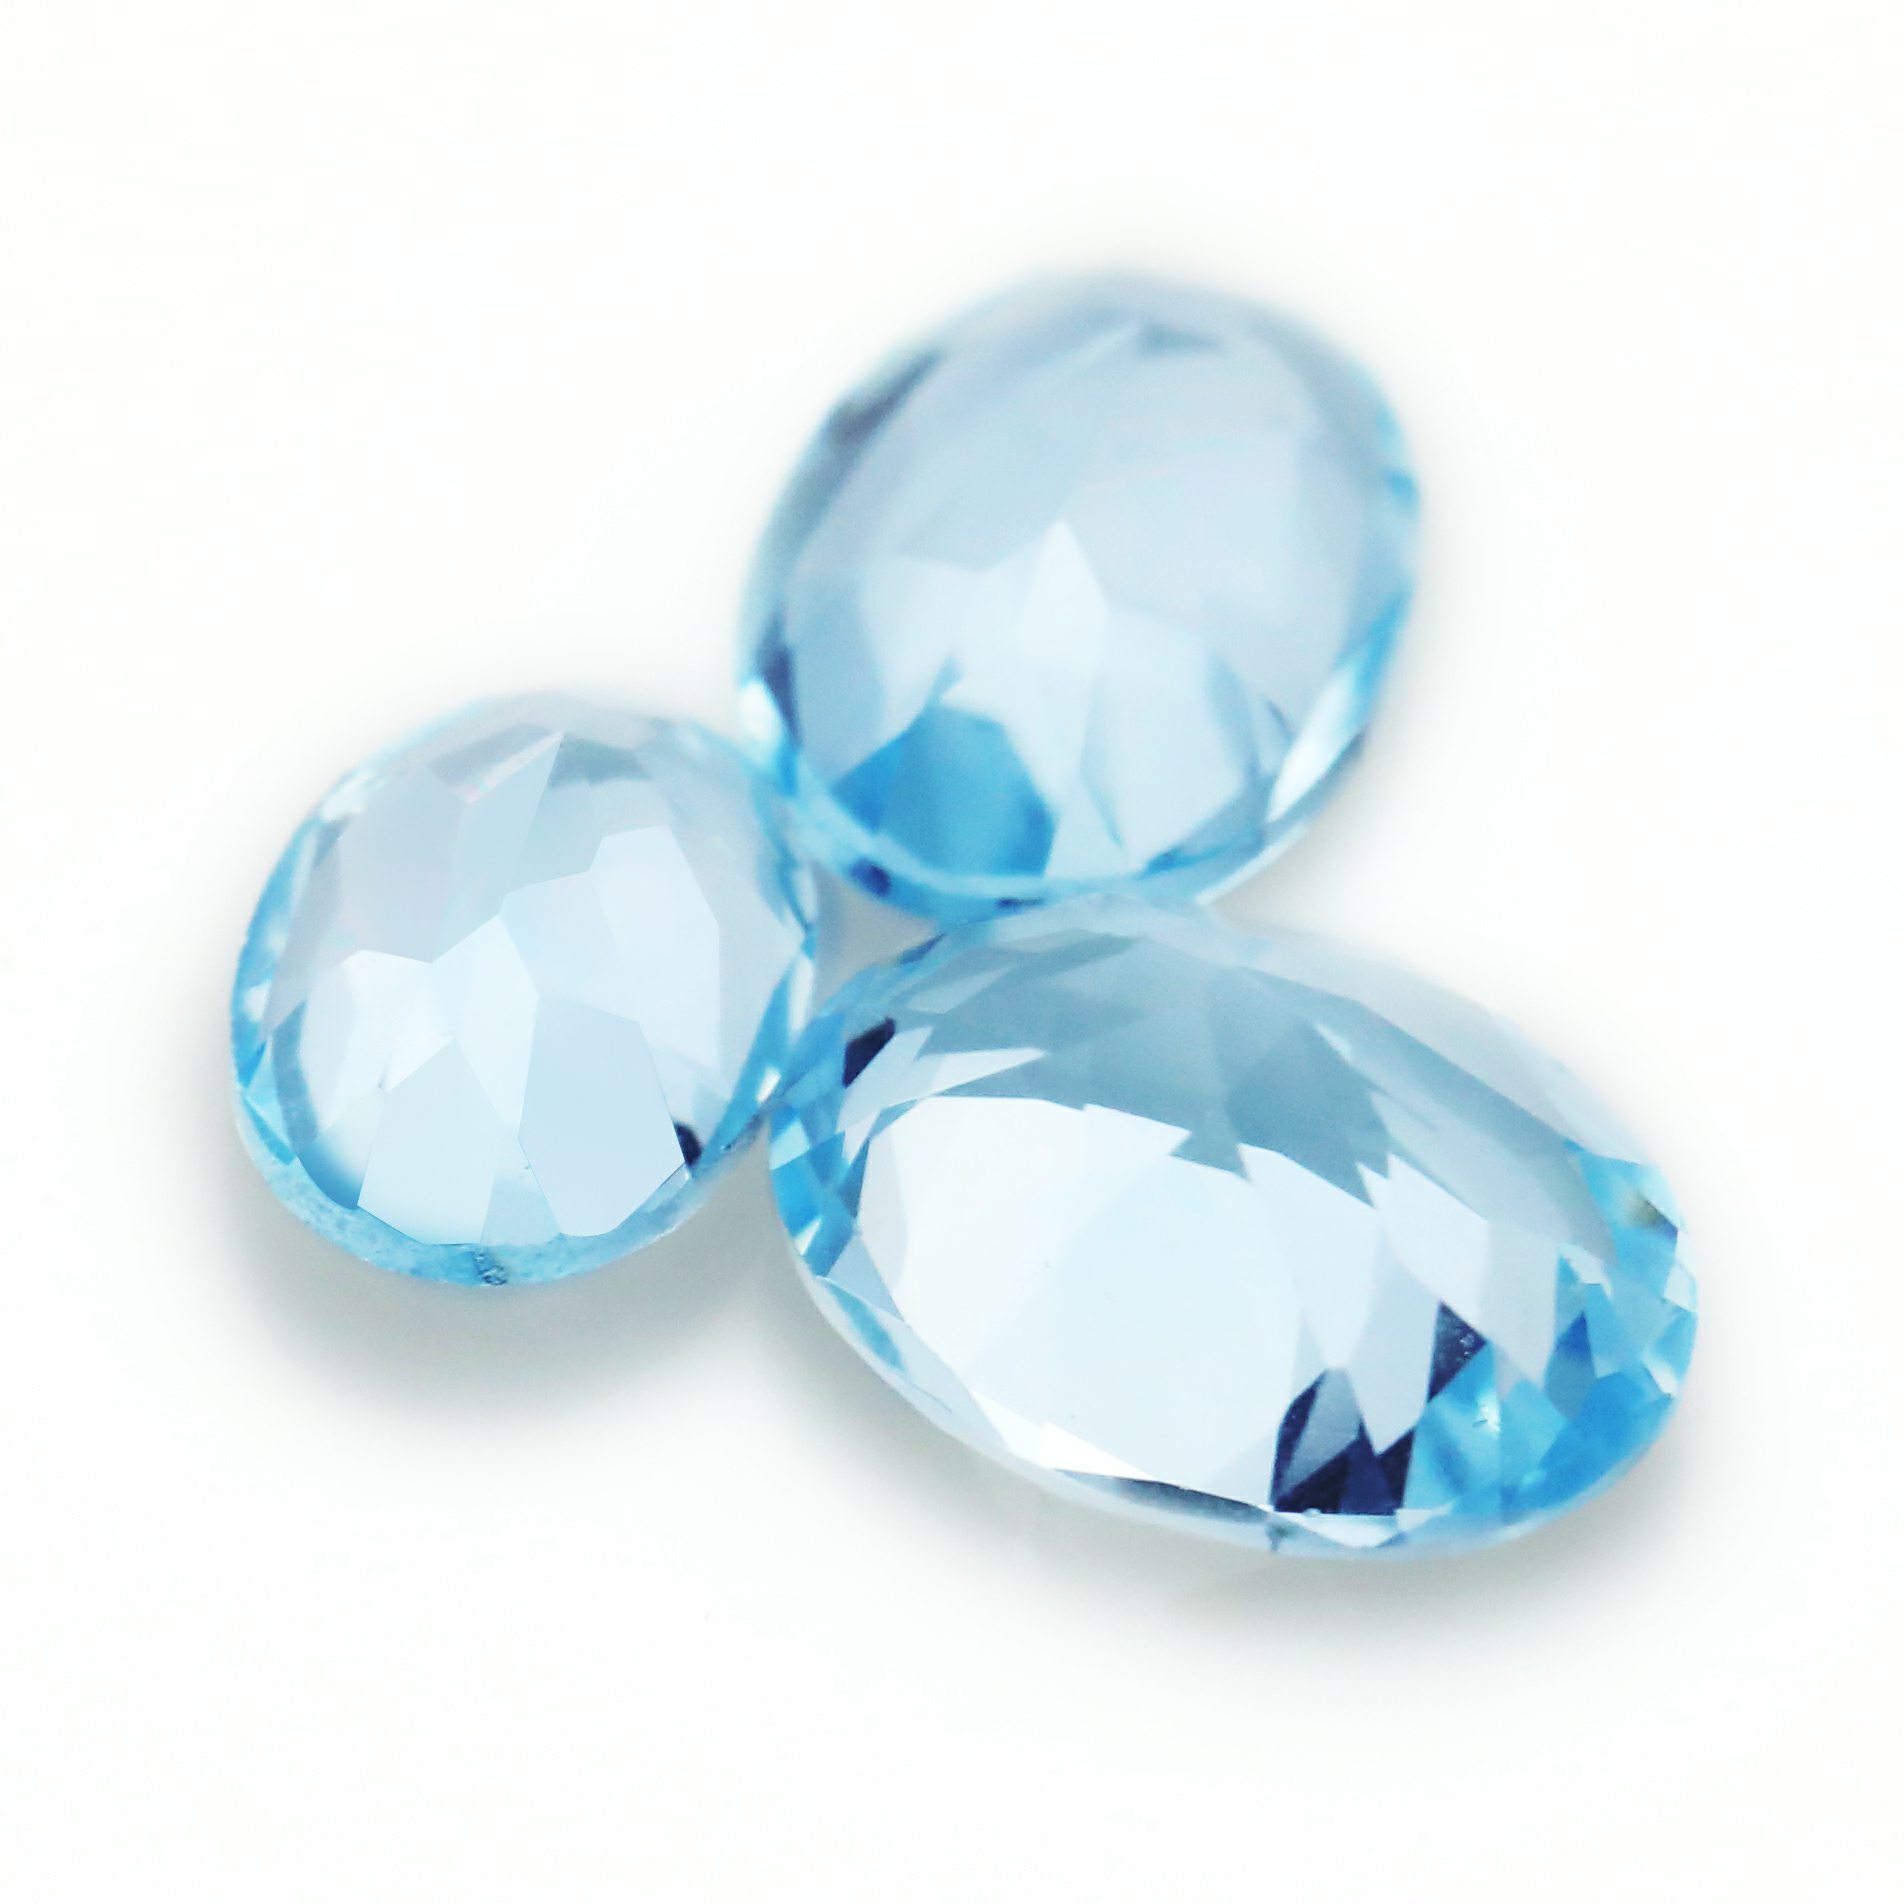 1Pcs Oval Faceted Sky Blue Topaz Nature October Birthstone DIY Loose Gemstone Supplies 4120141 - Click Image to Close